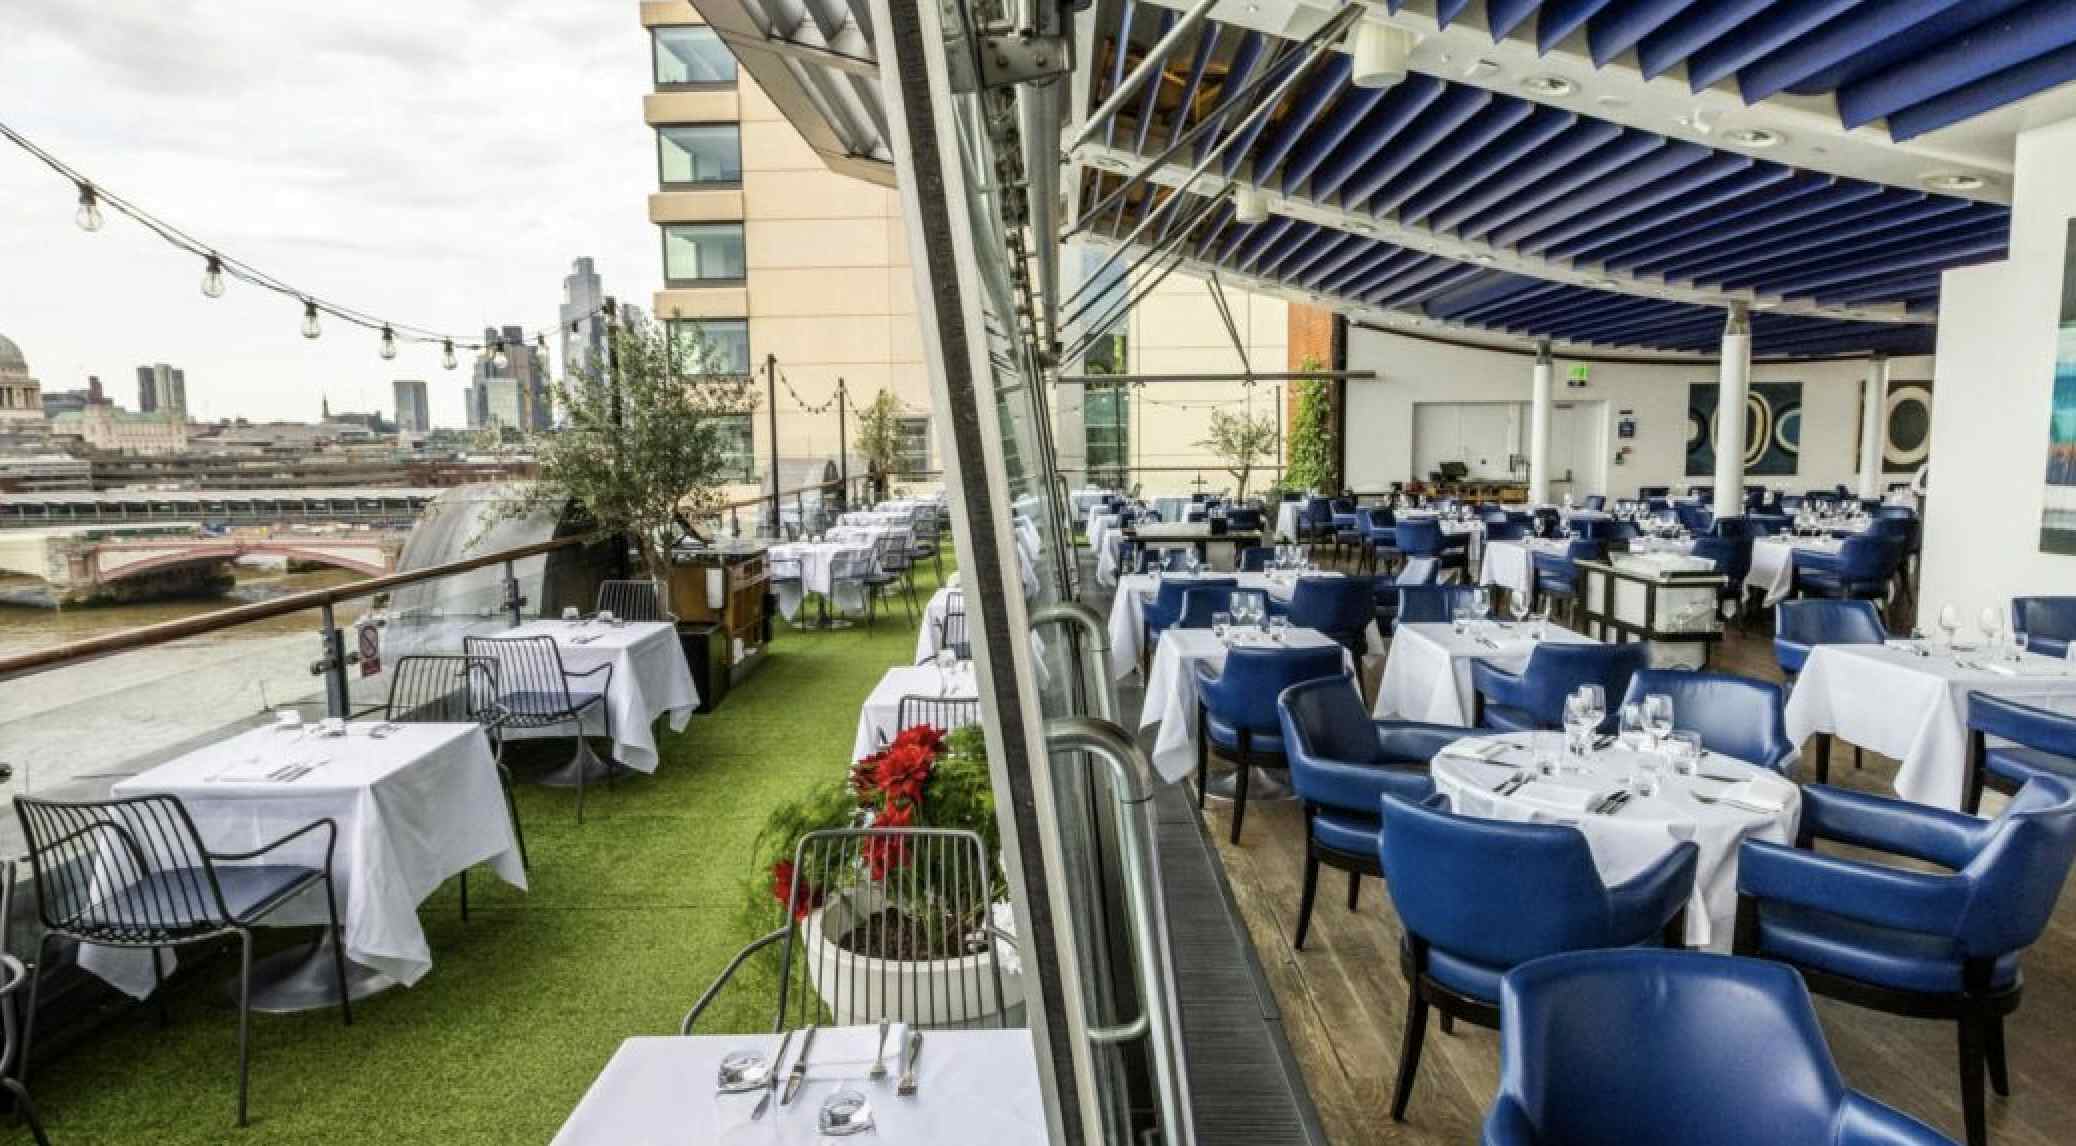 The Brasserie and bar, OXO Tower Restaurant, Bar and Brasserie